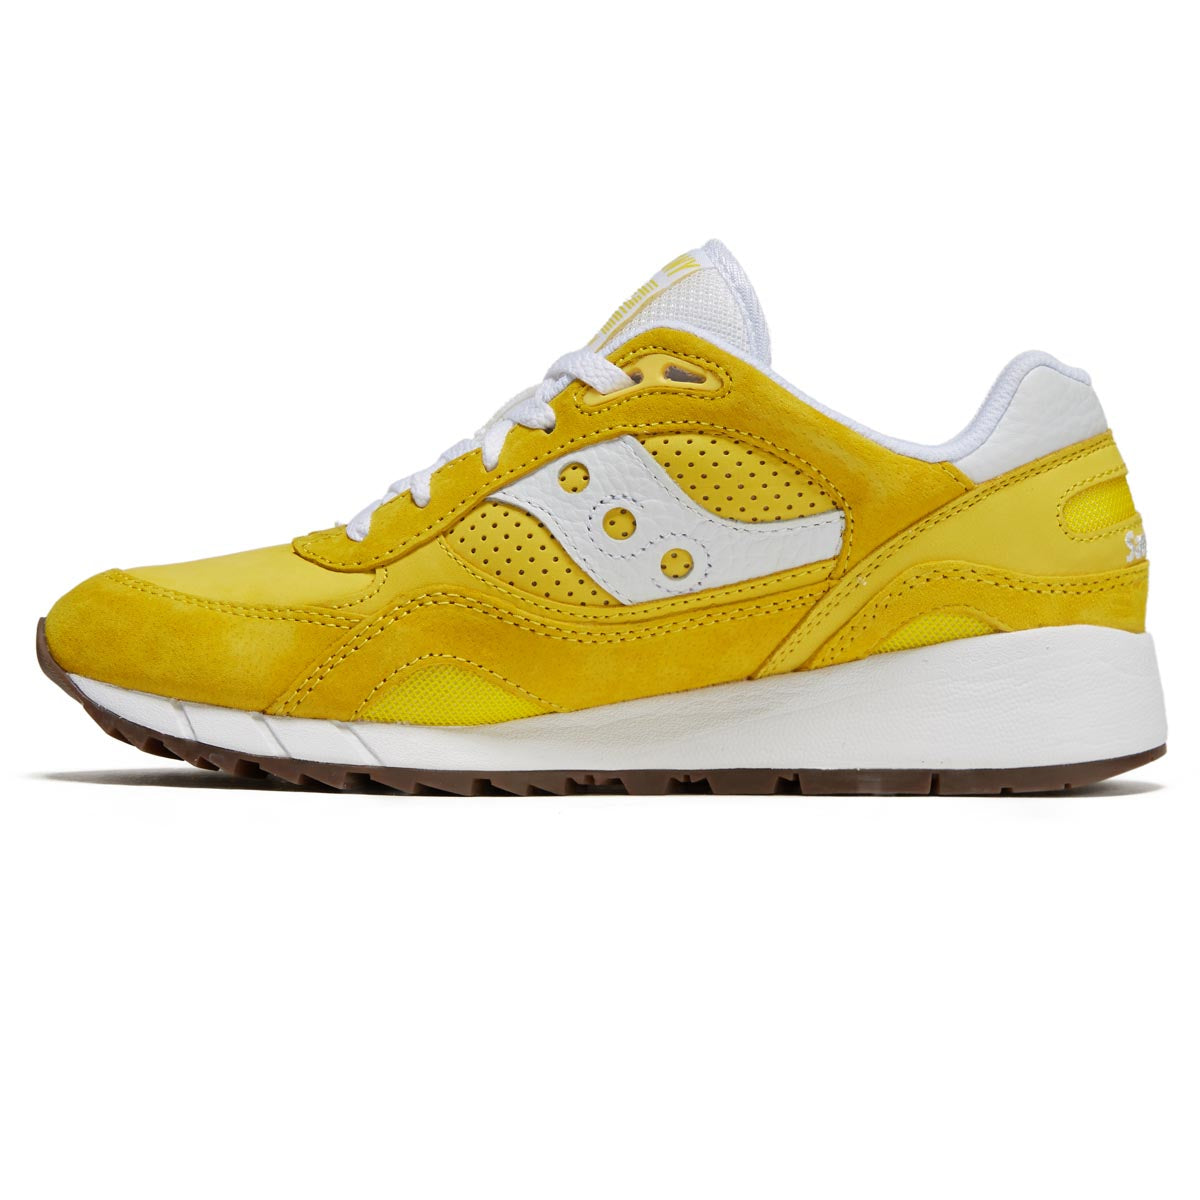 Saucony Shadow 6000 Shoes - Yellow/White image 2